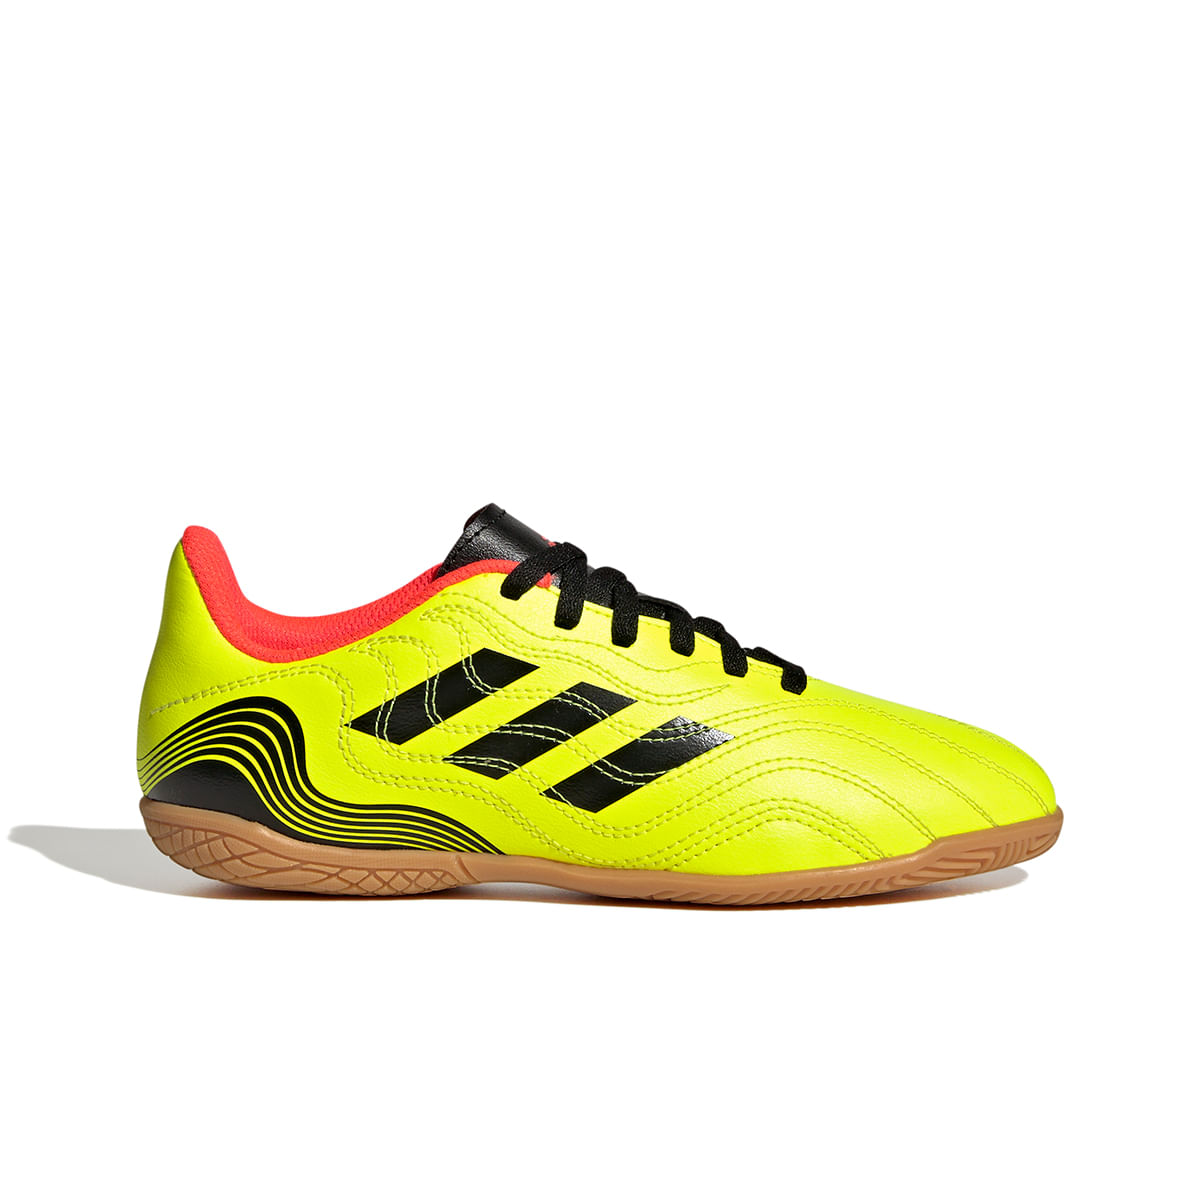 Botines Adidas In J a